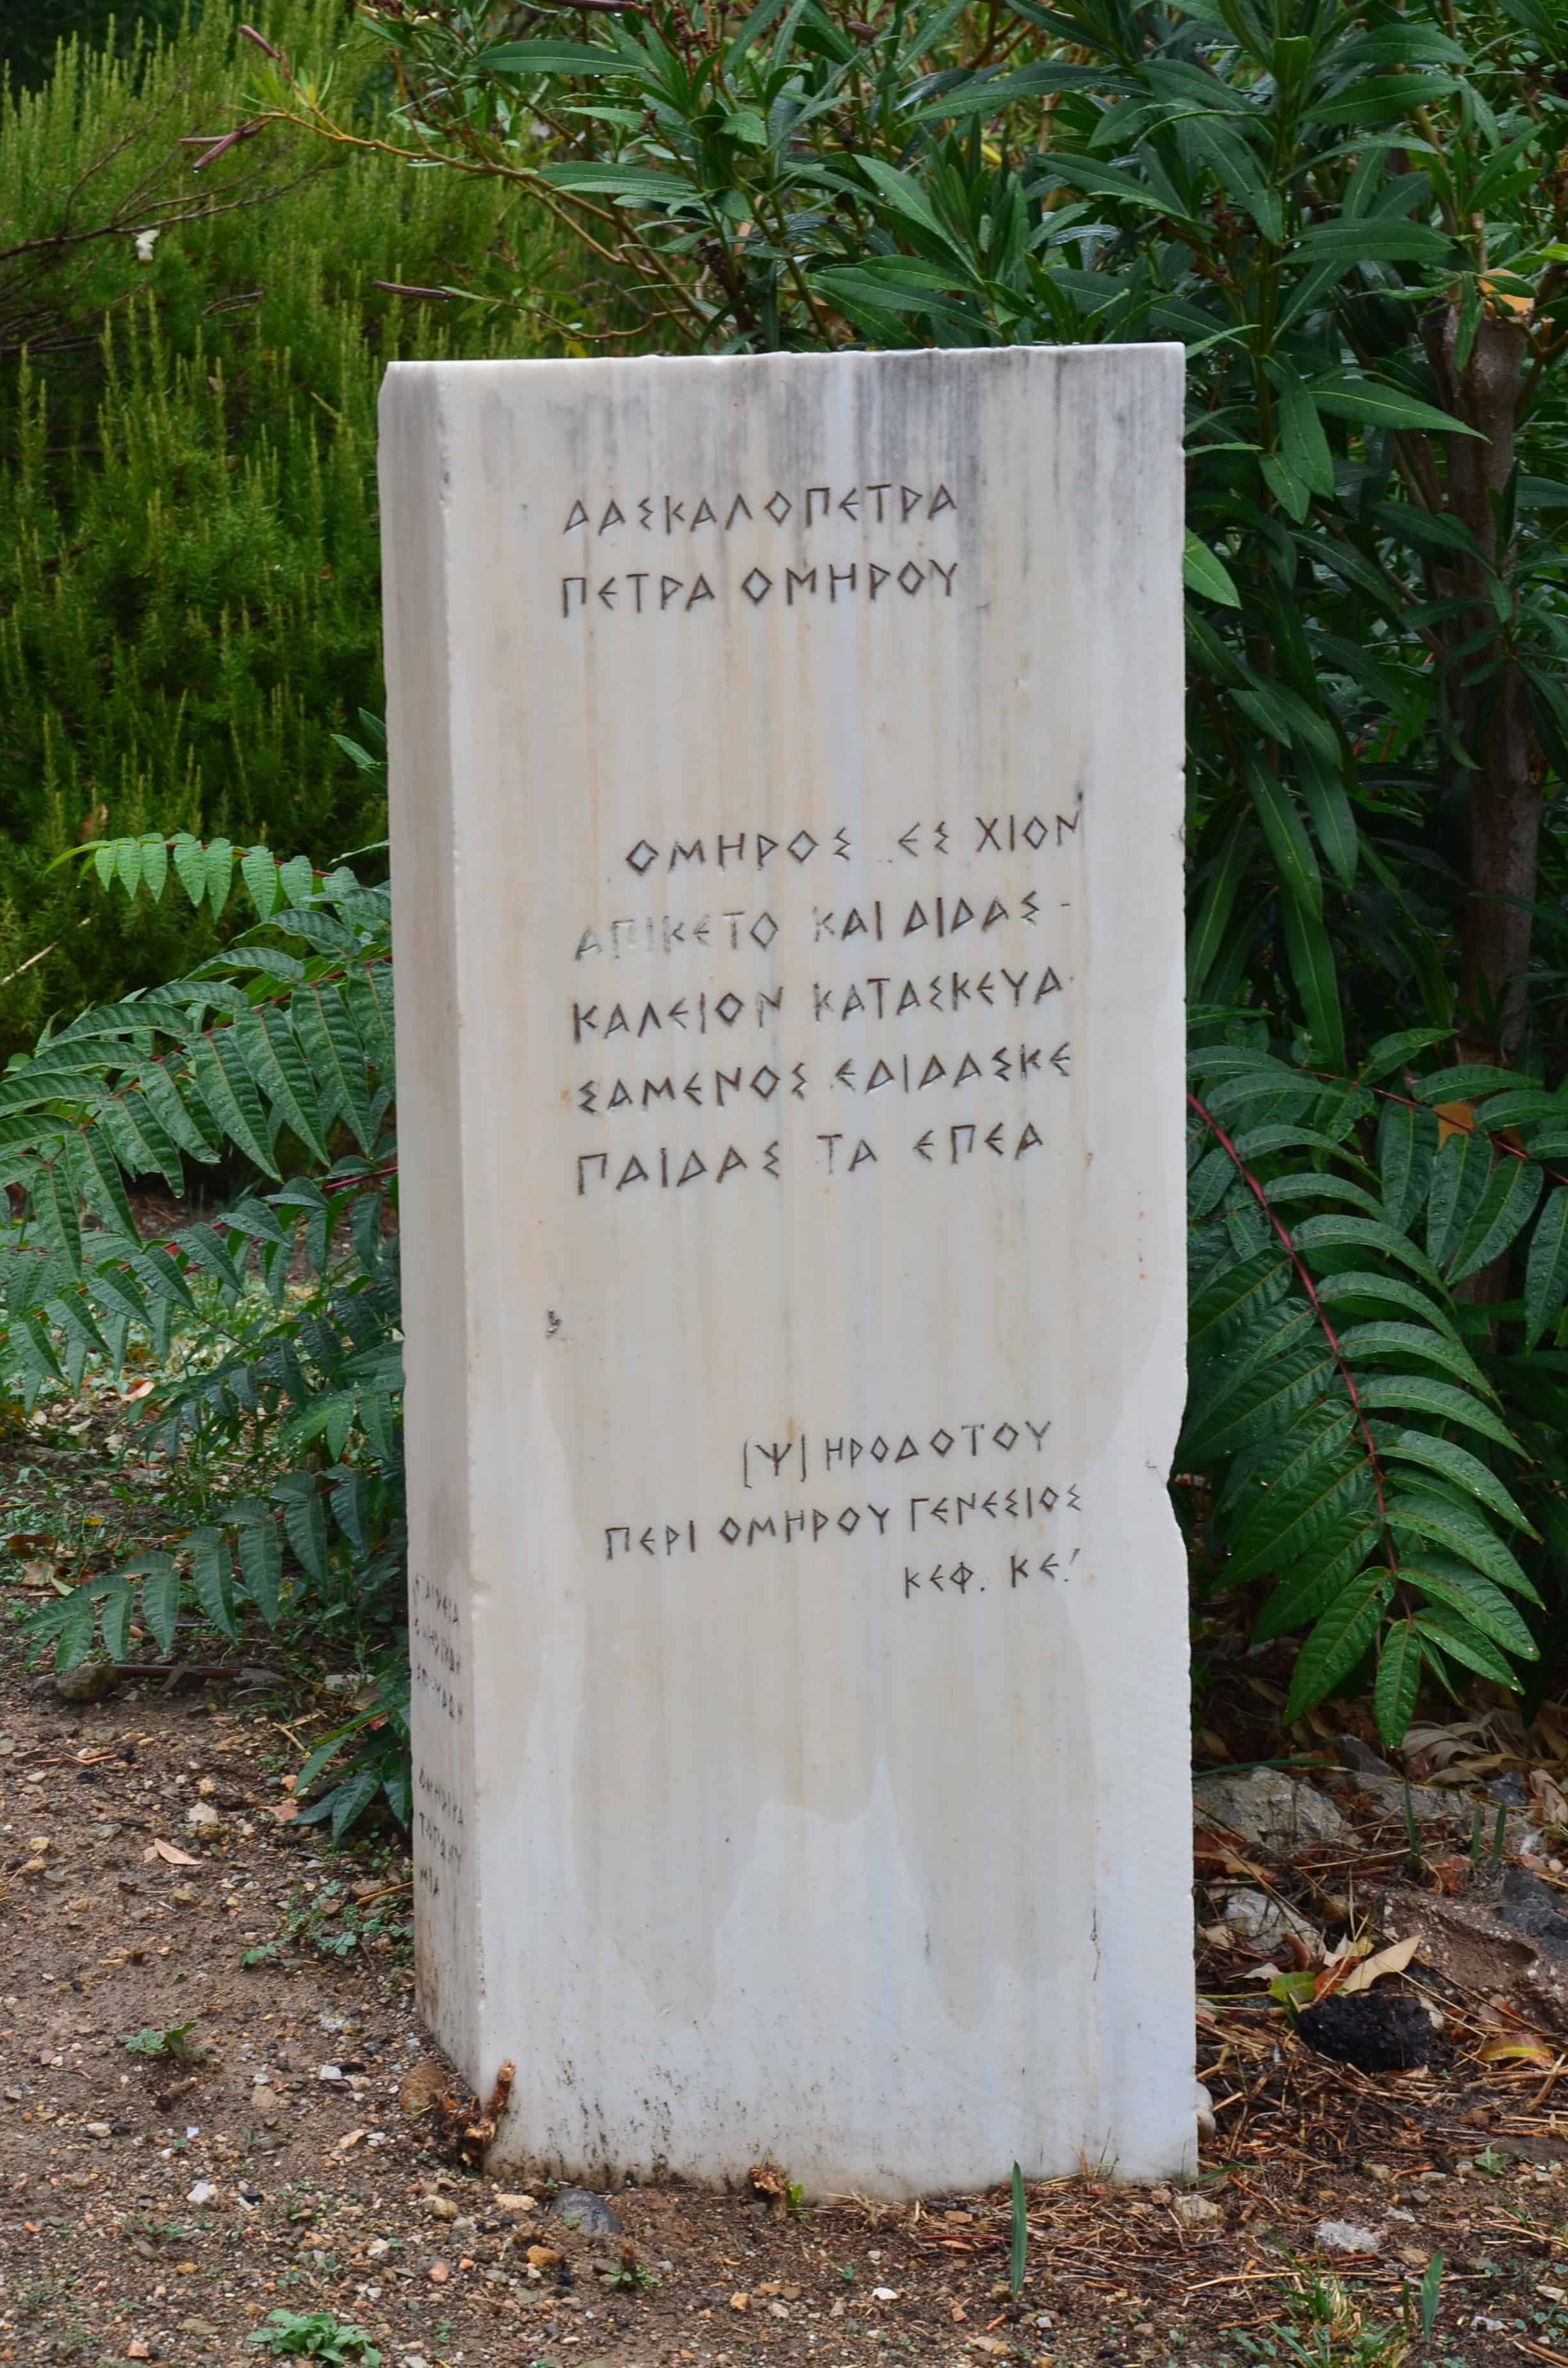 An inscription about Daskolopetra by Herodotus in Vrontados, Chios, Greece